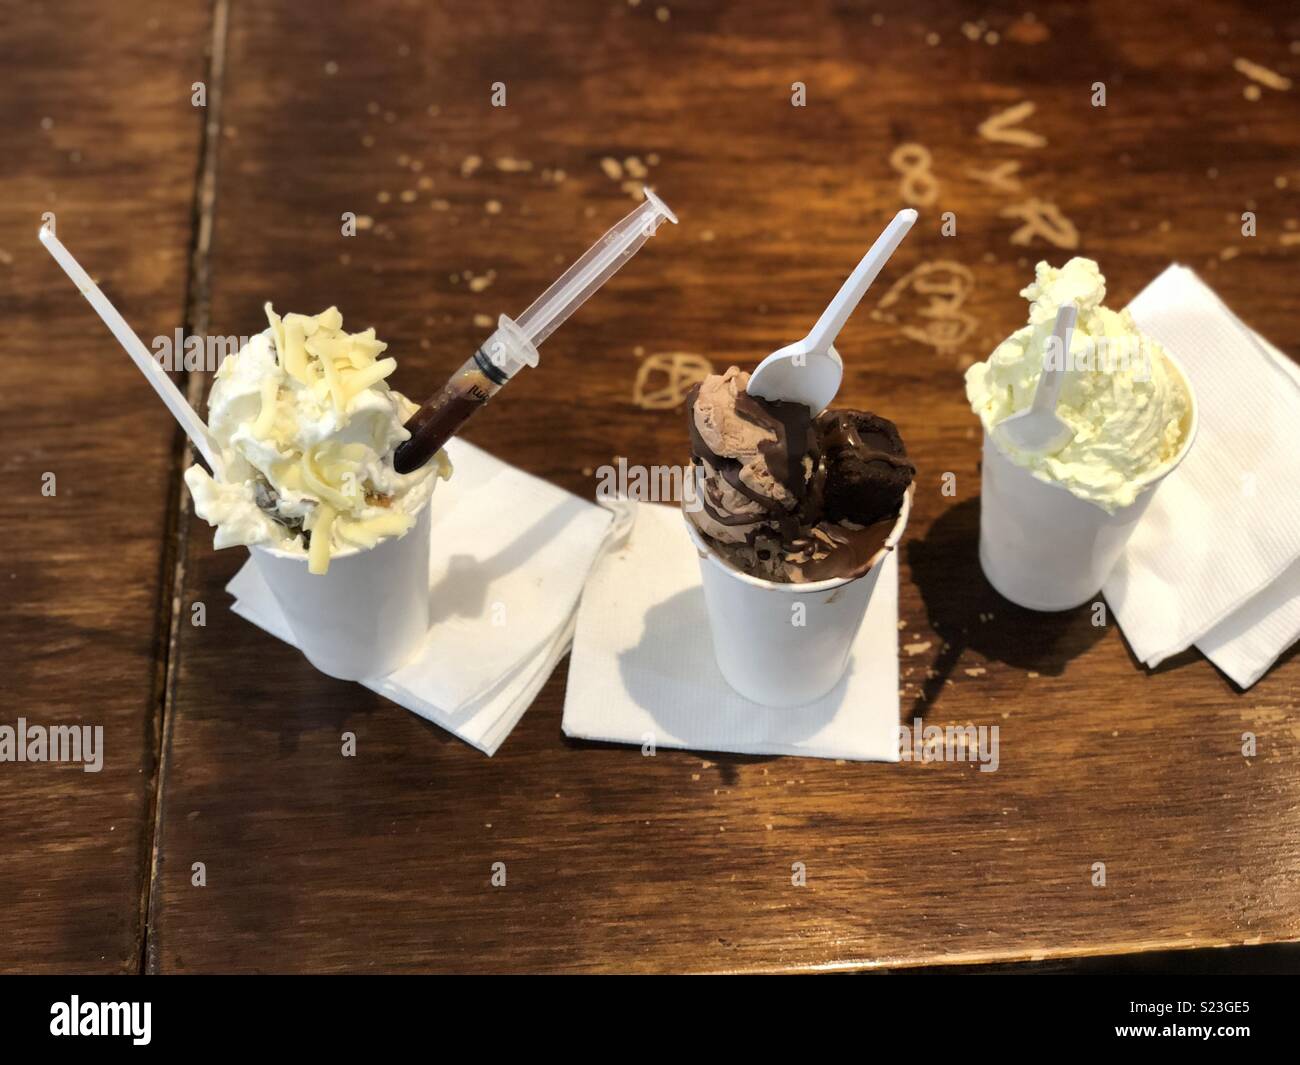 Nitrogen ice cream... supposedly the ice crystals are smaller, making the ice cream smoother ... Stock Photo